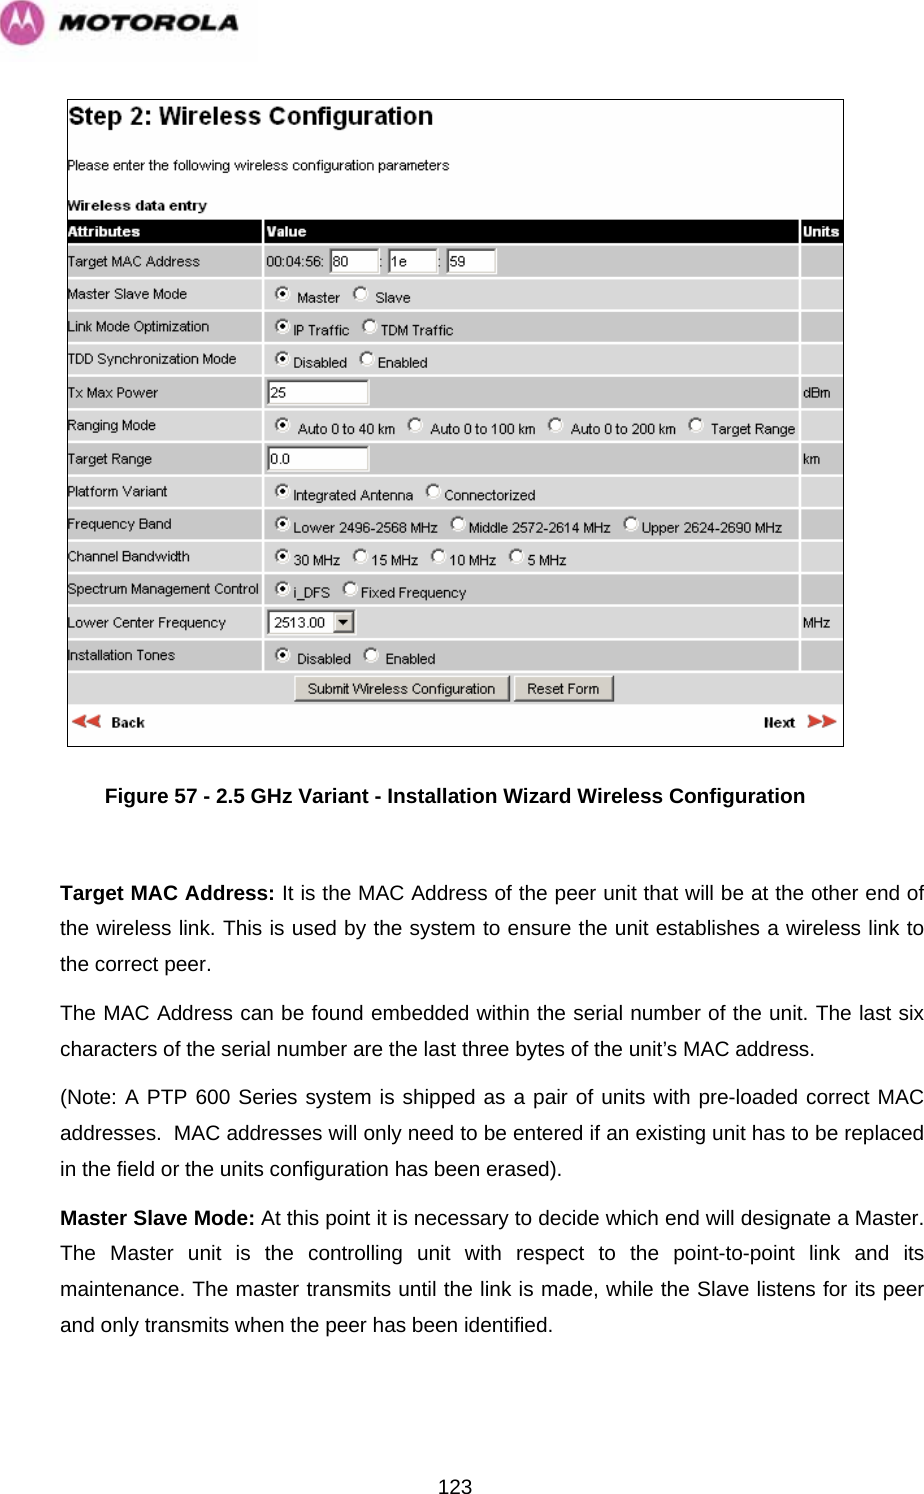   123 Figure 57 - 2.5 GHz Variant - Installation Wizard Wireless Configuration  Target MAC Address: It is the MAC Address of the peer unit that will be at the other end of the wireless link. This is used by the system to ensure the unit establishes a wireless link to the correct peer.  The MAC Address can be found embedded within the serial number of the unit. The last six characters of the serial number are the last three bytes of the unit’s MAC address. (Note: A PTP 600 Series system is shipped as a pair of units with pre-loaded correct MAC addresses.  MAC addresses will only need to be entered if an existing unit has to be replaced in the field or the units configuration has been erased). Master Slave Mode: At this point it is necessary to decide which end will designate a Master. The Master unit is the controlling unit with respect to the point-to-point link and its maintenance. The master transmits until the link is made, while the Slave listens for its peer and only transmits when the peer has been identified.  